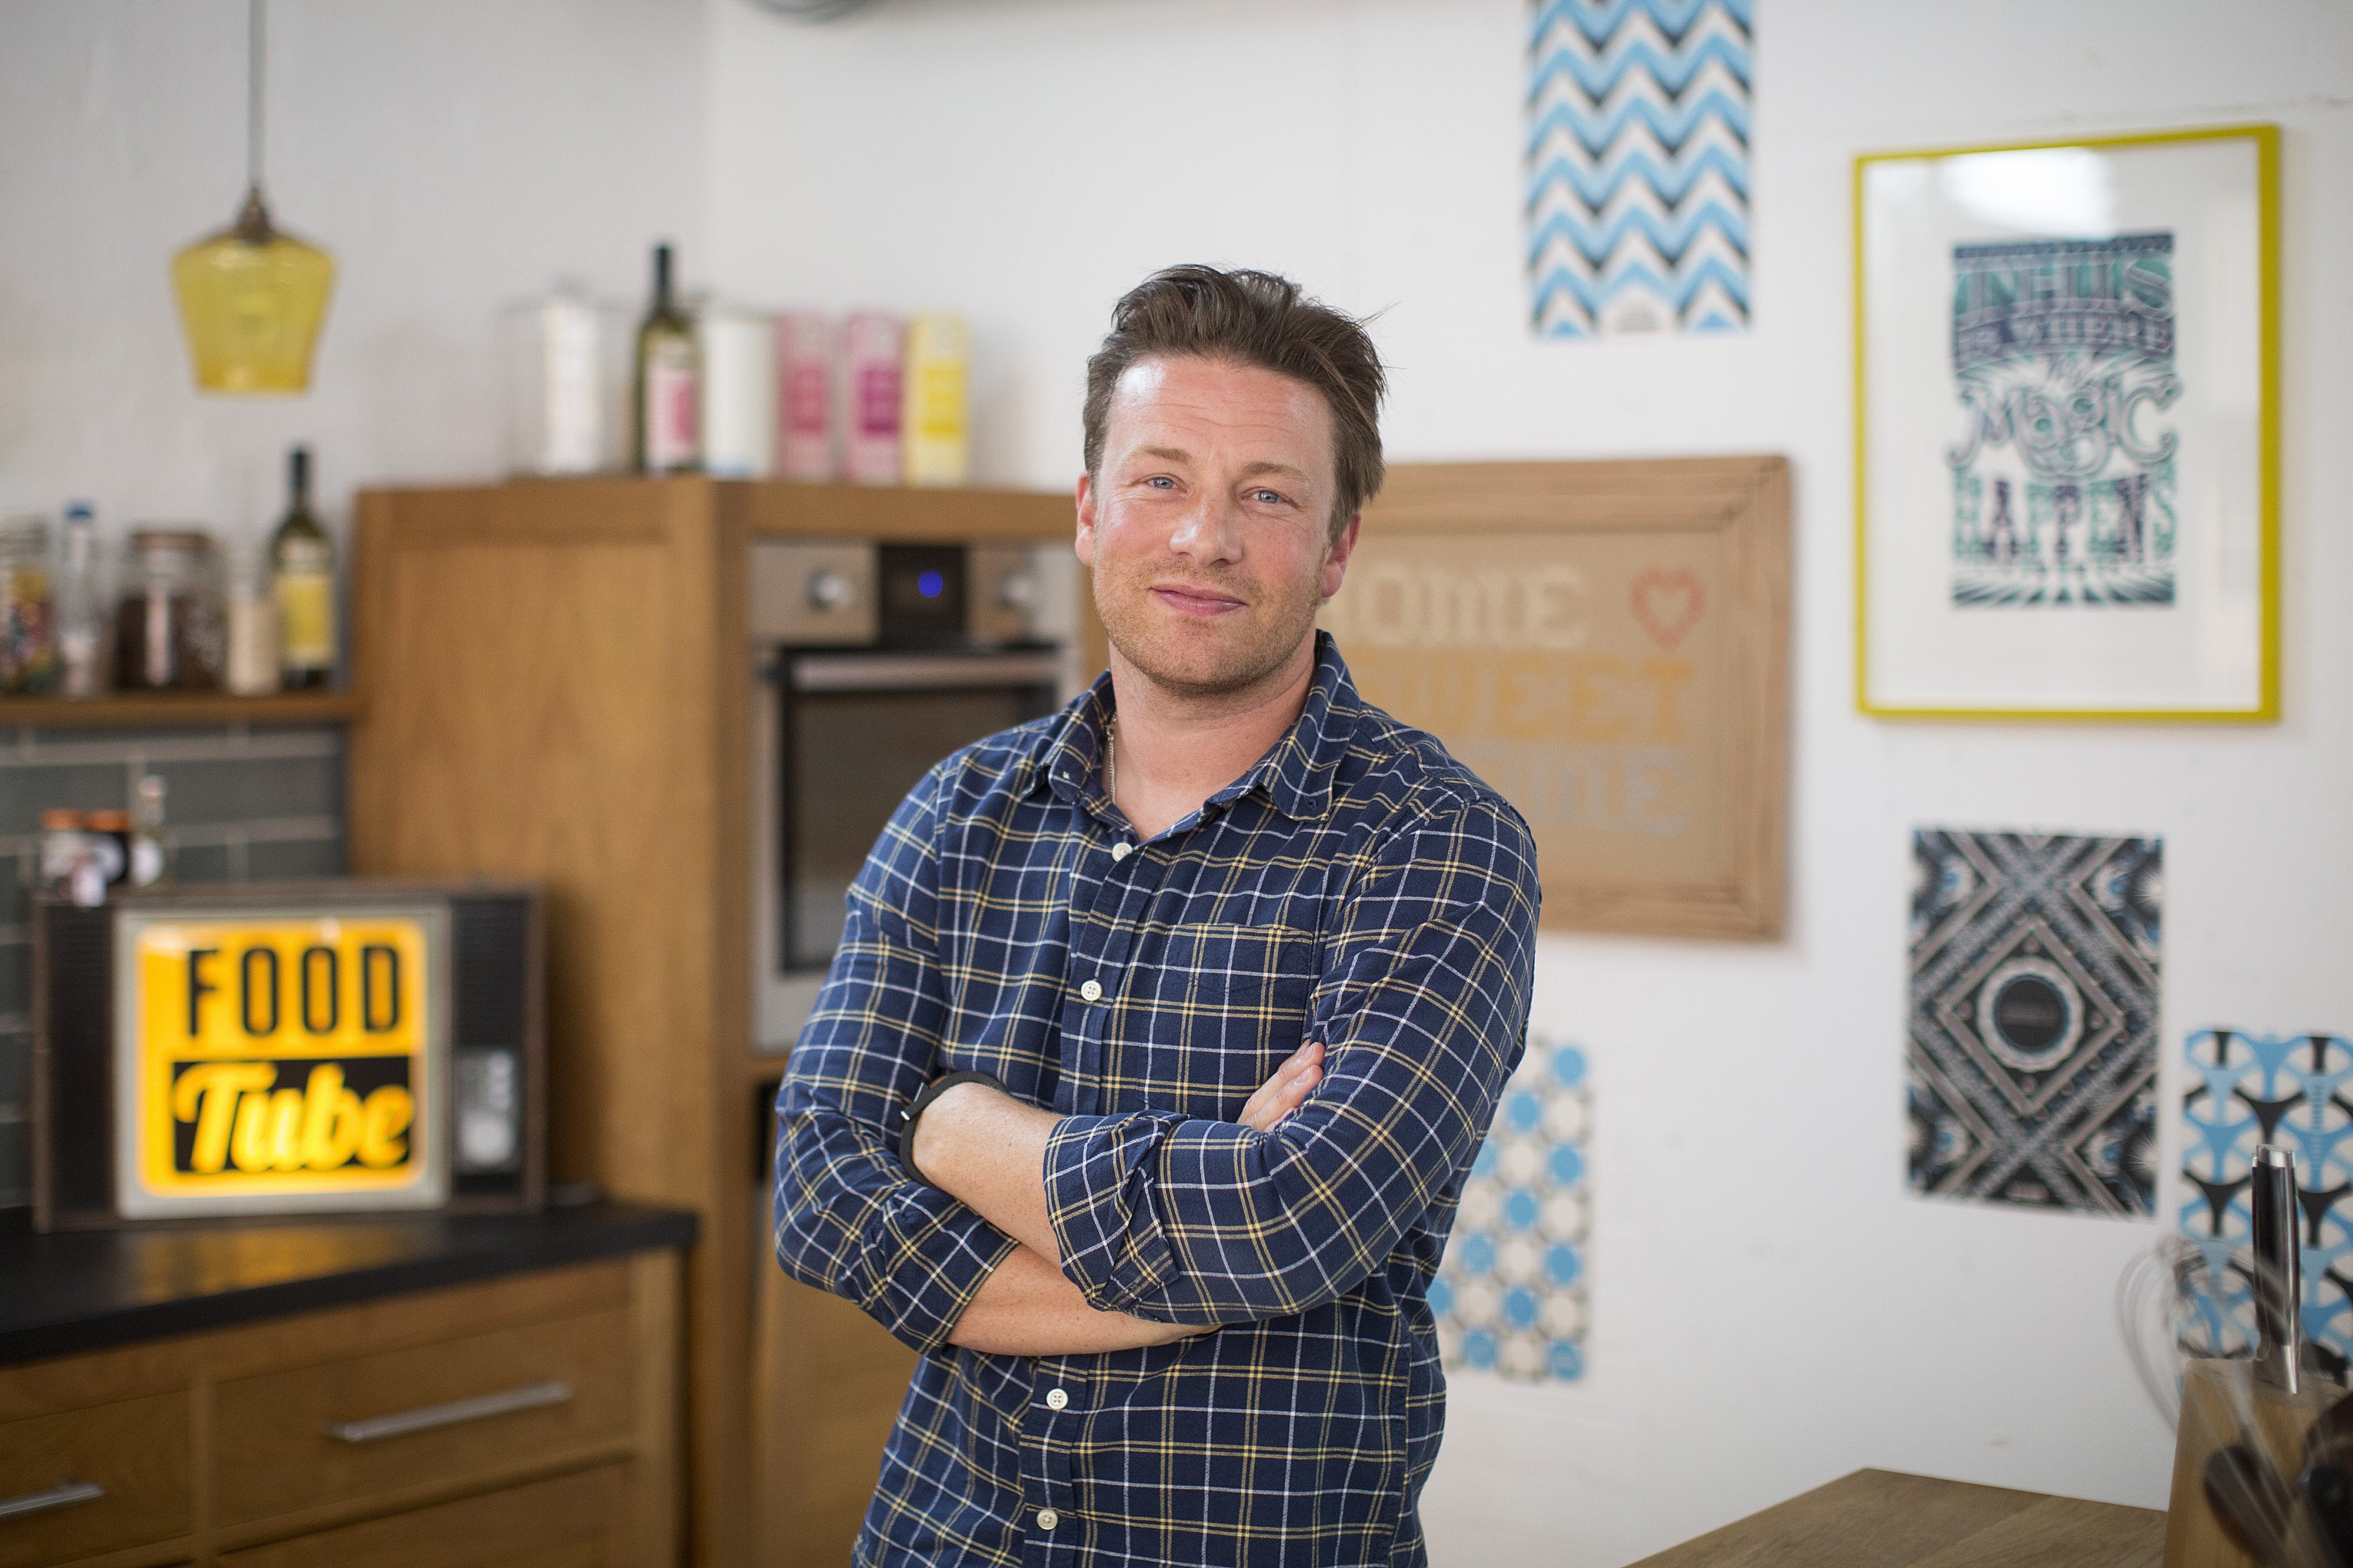 Jamie Oliver pictured after an interview in his office in 2014, London, England. | Photo: Getty Images